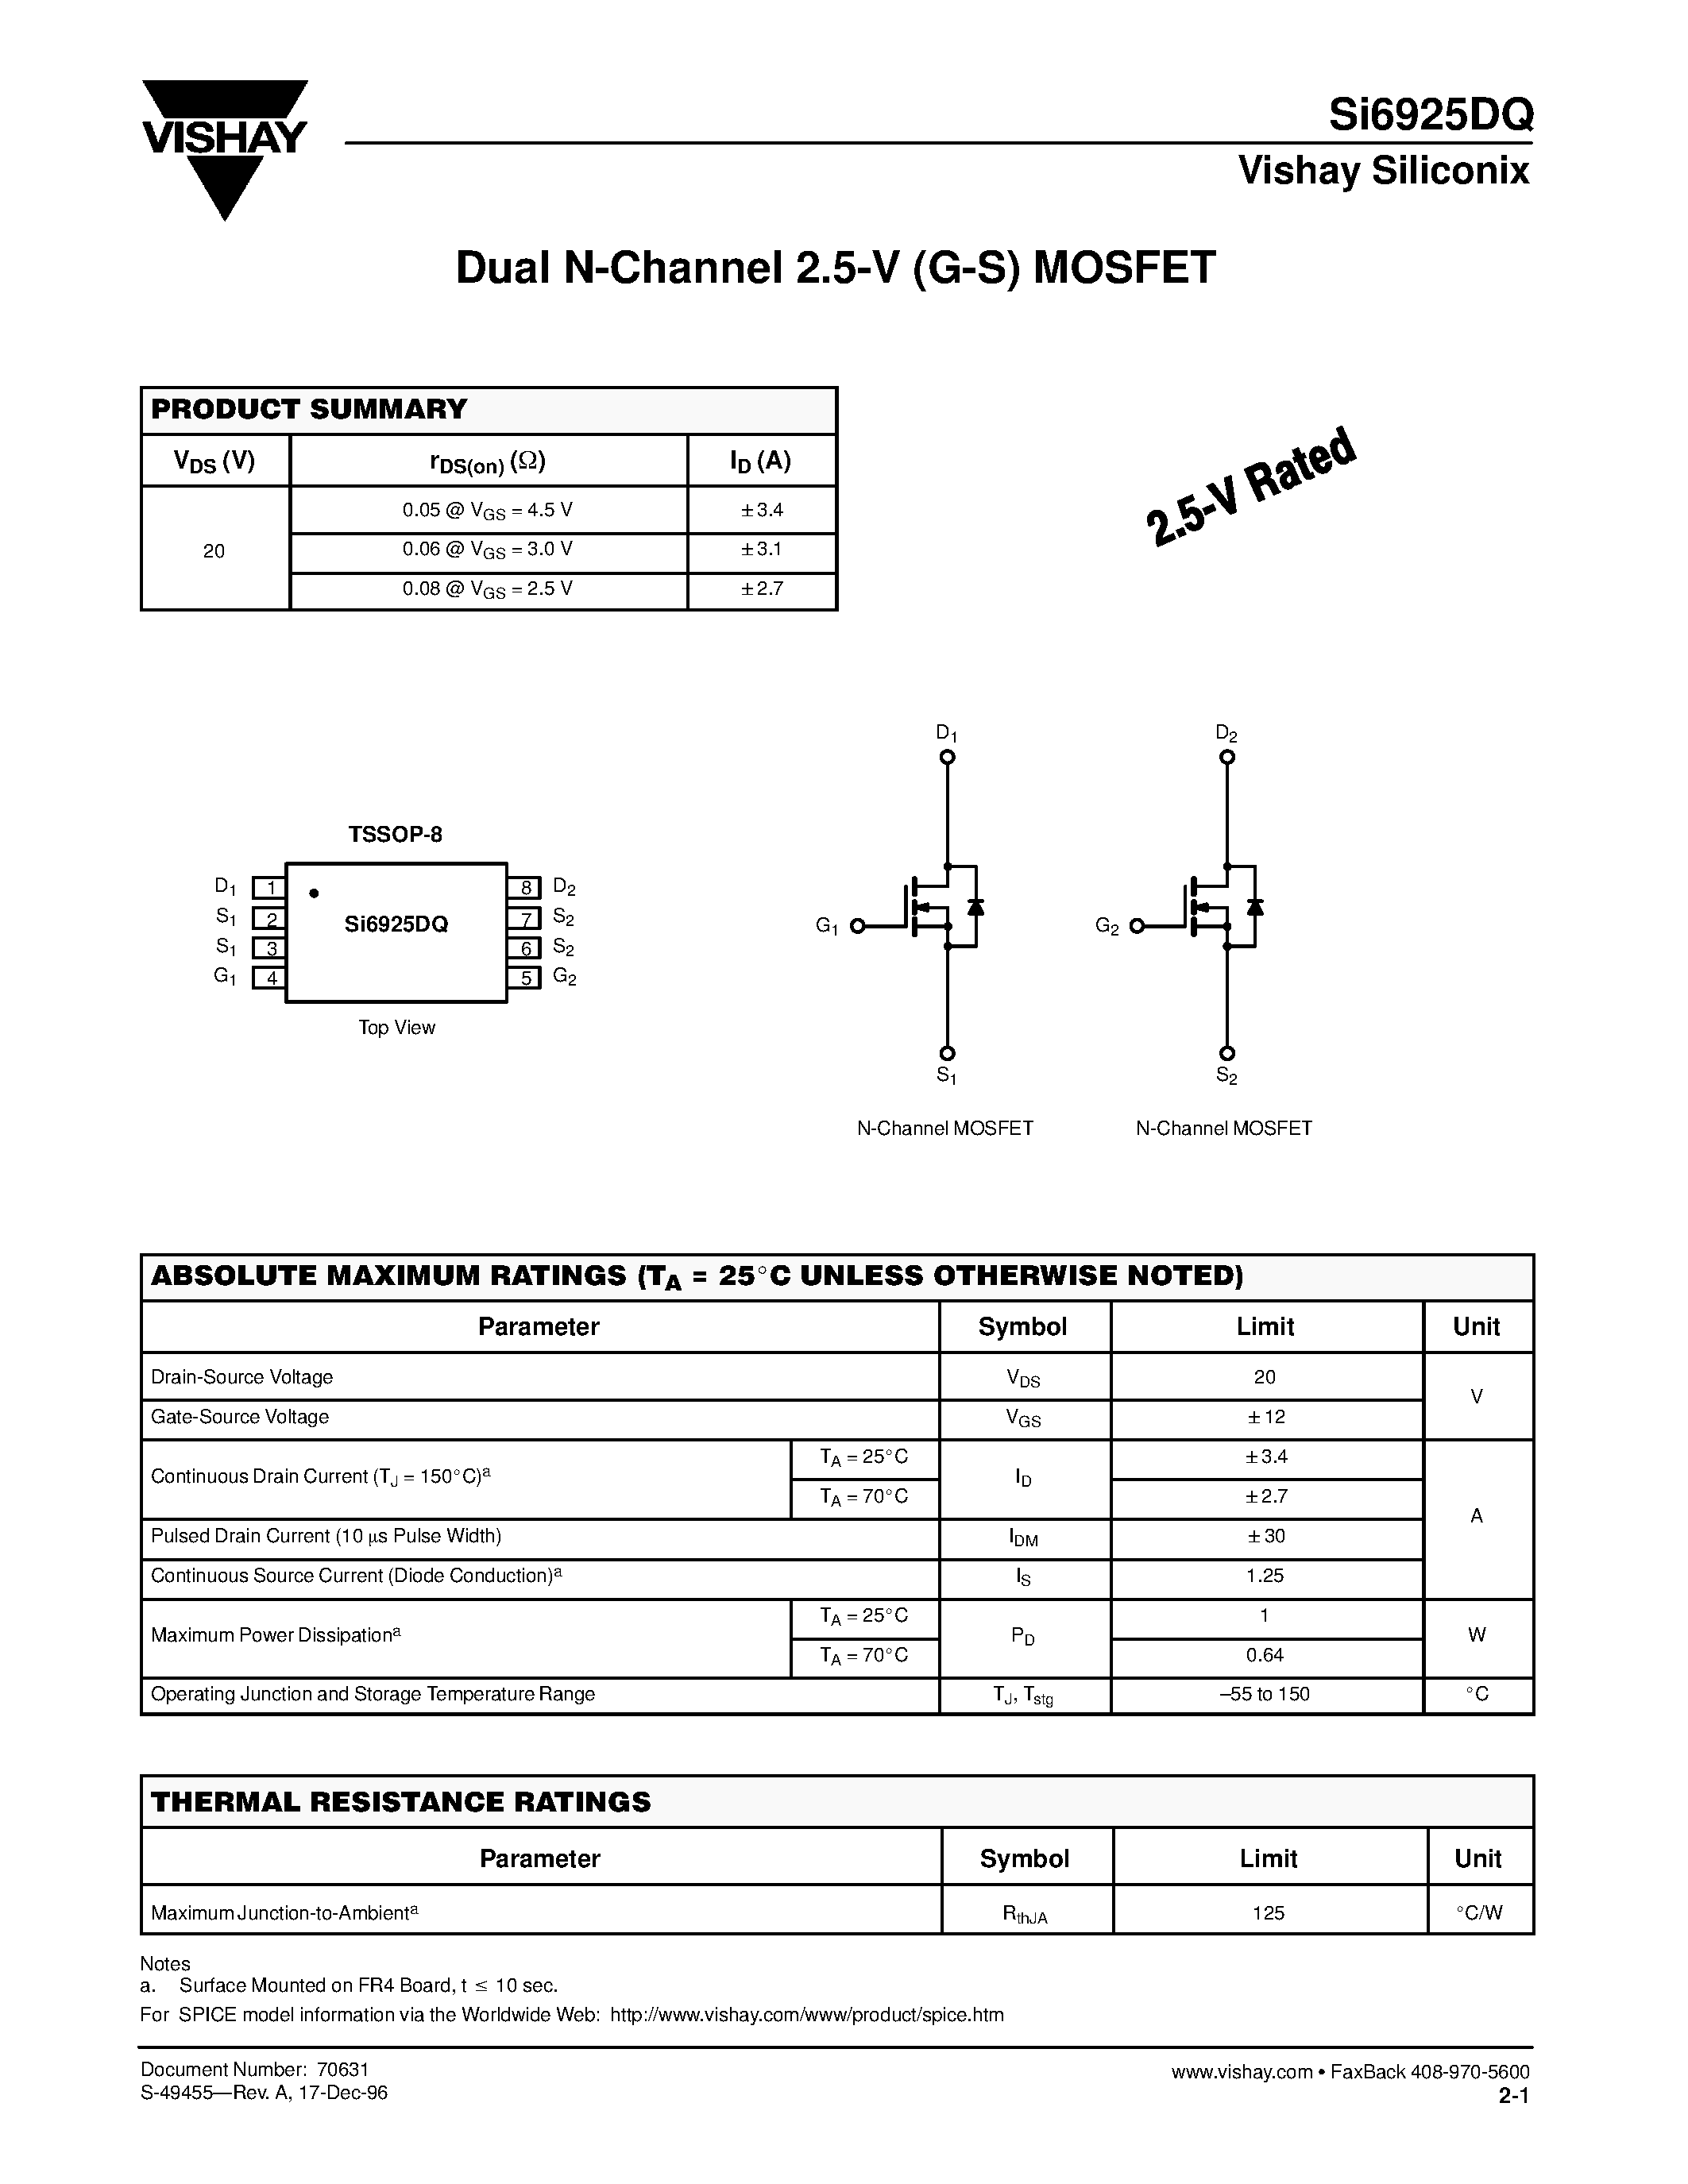 Даташит SI6925DQ - Dual N-Channel 2.5-V (G-S) MOSFET страница 1